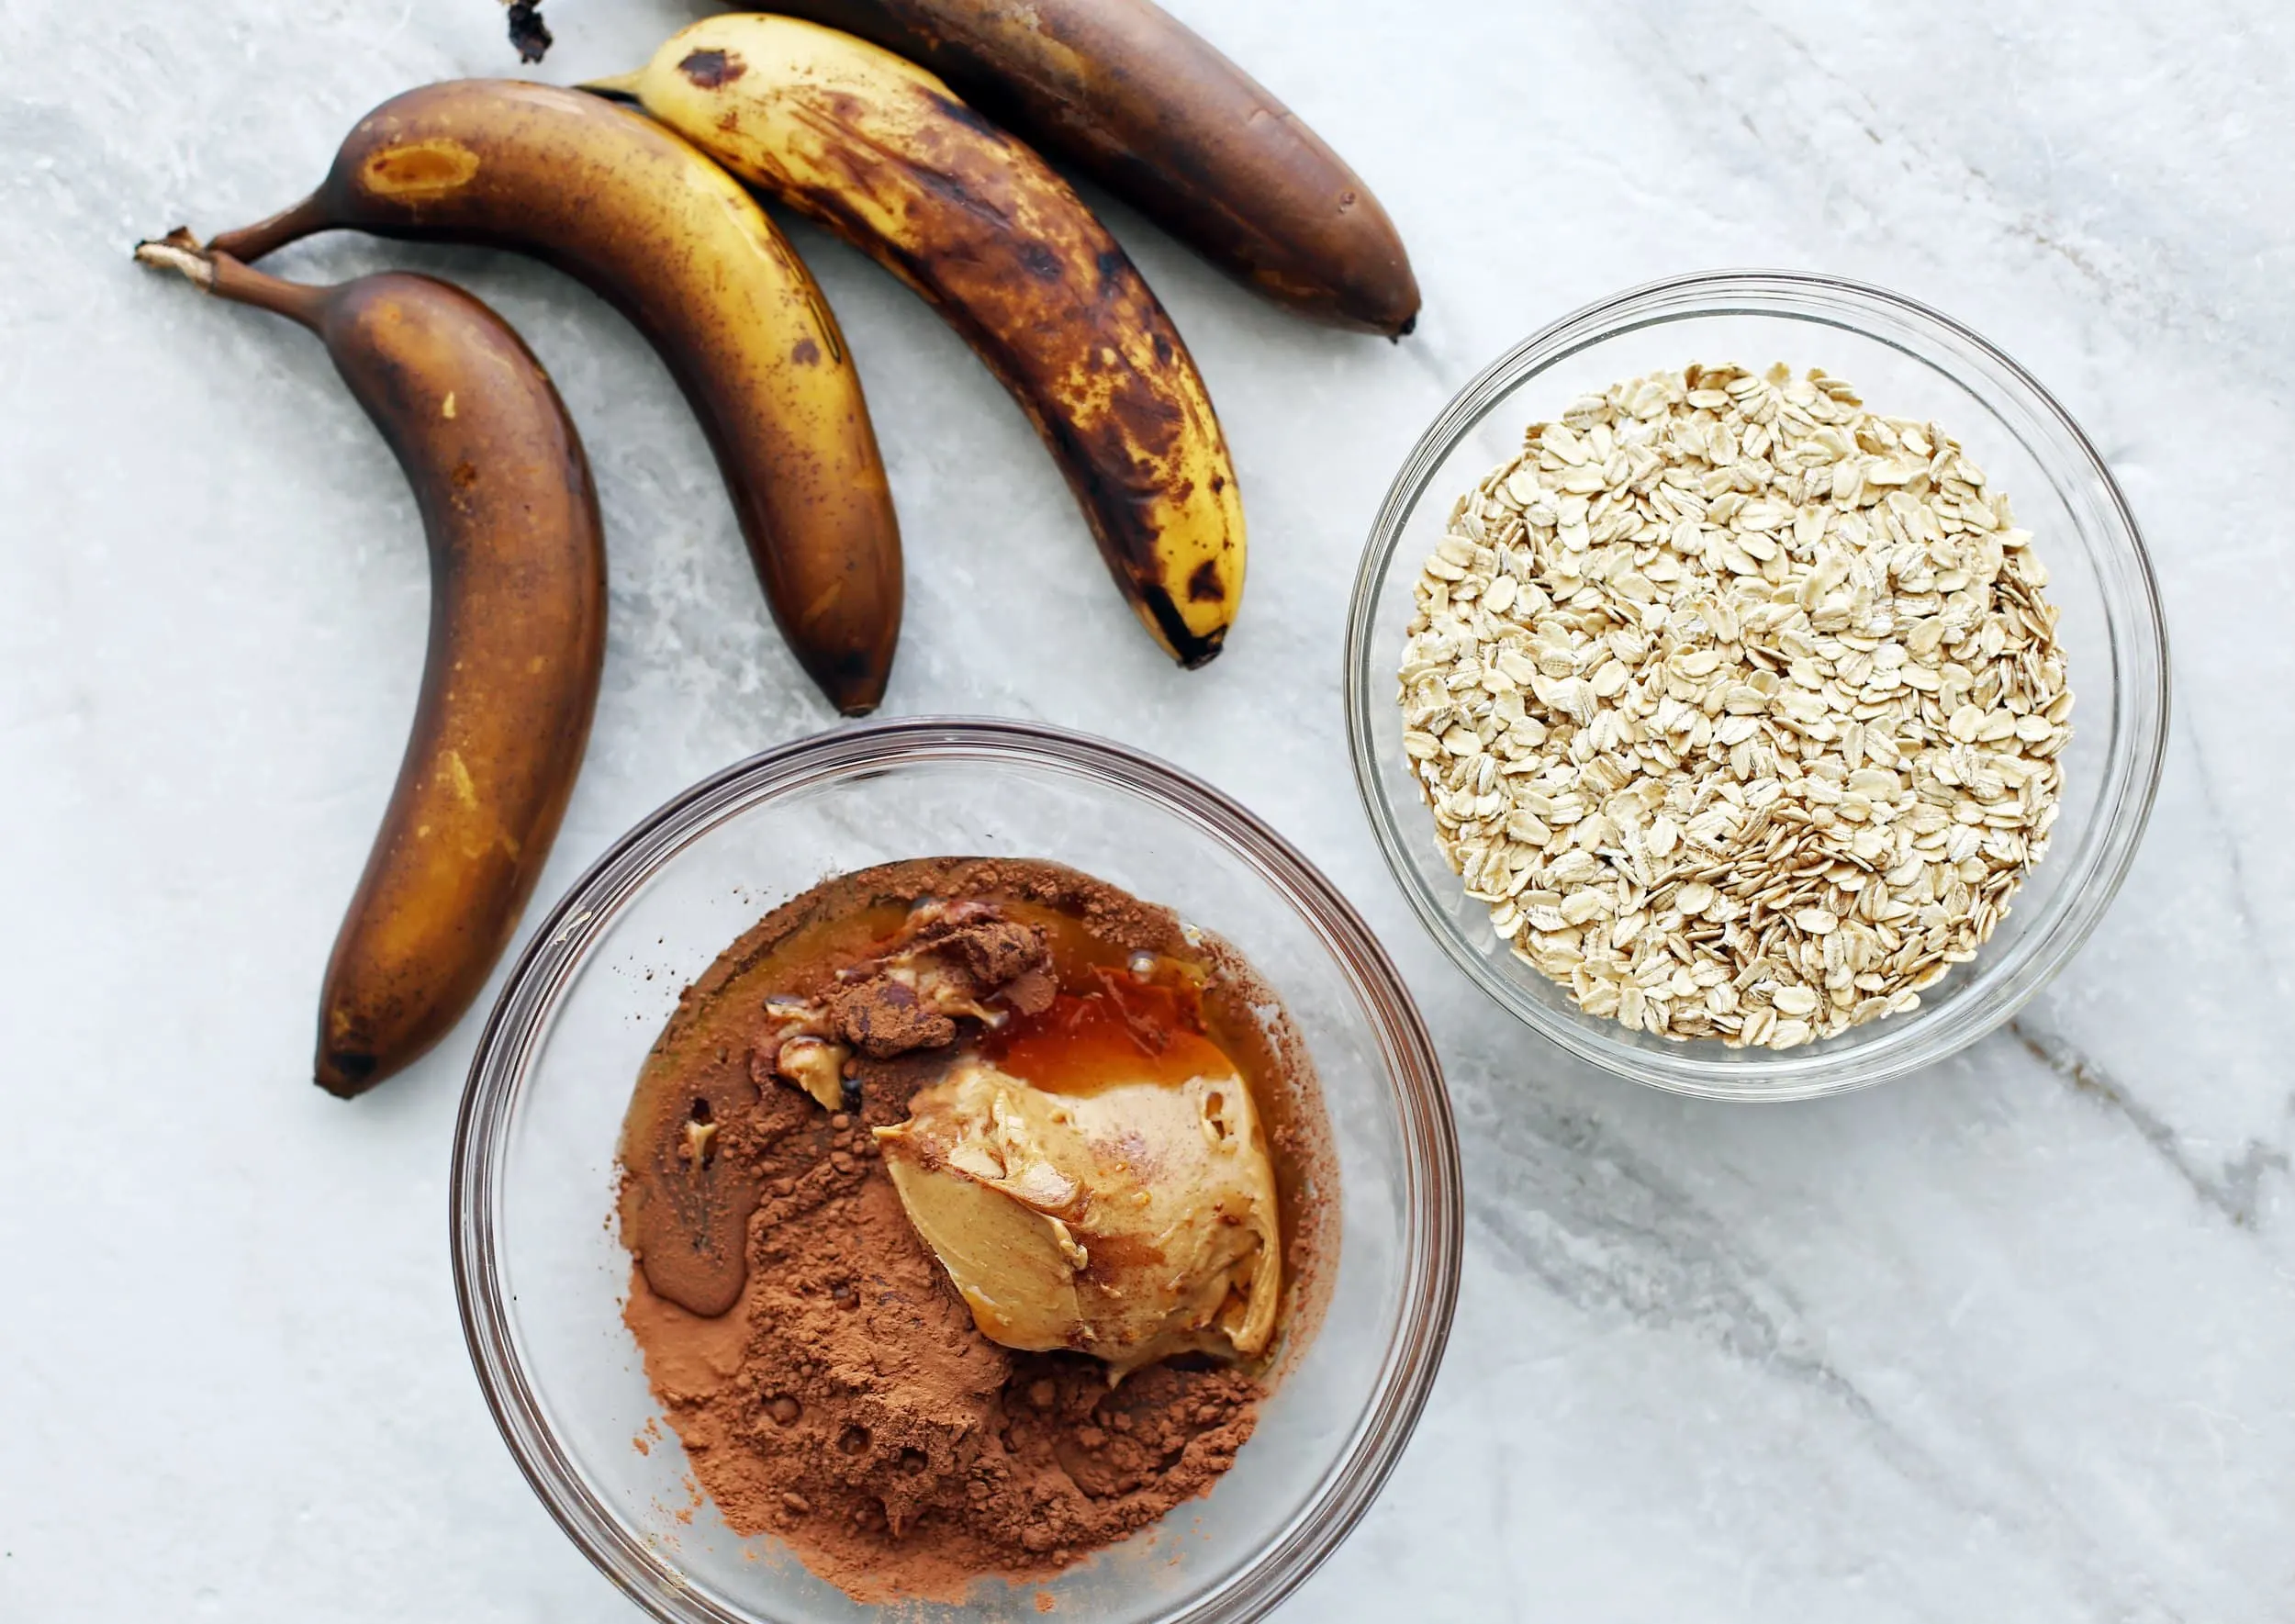 Four ripe banana, a bowl of peanut butter, cocoa powder, and maple syrup, and another bowl with oats.